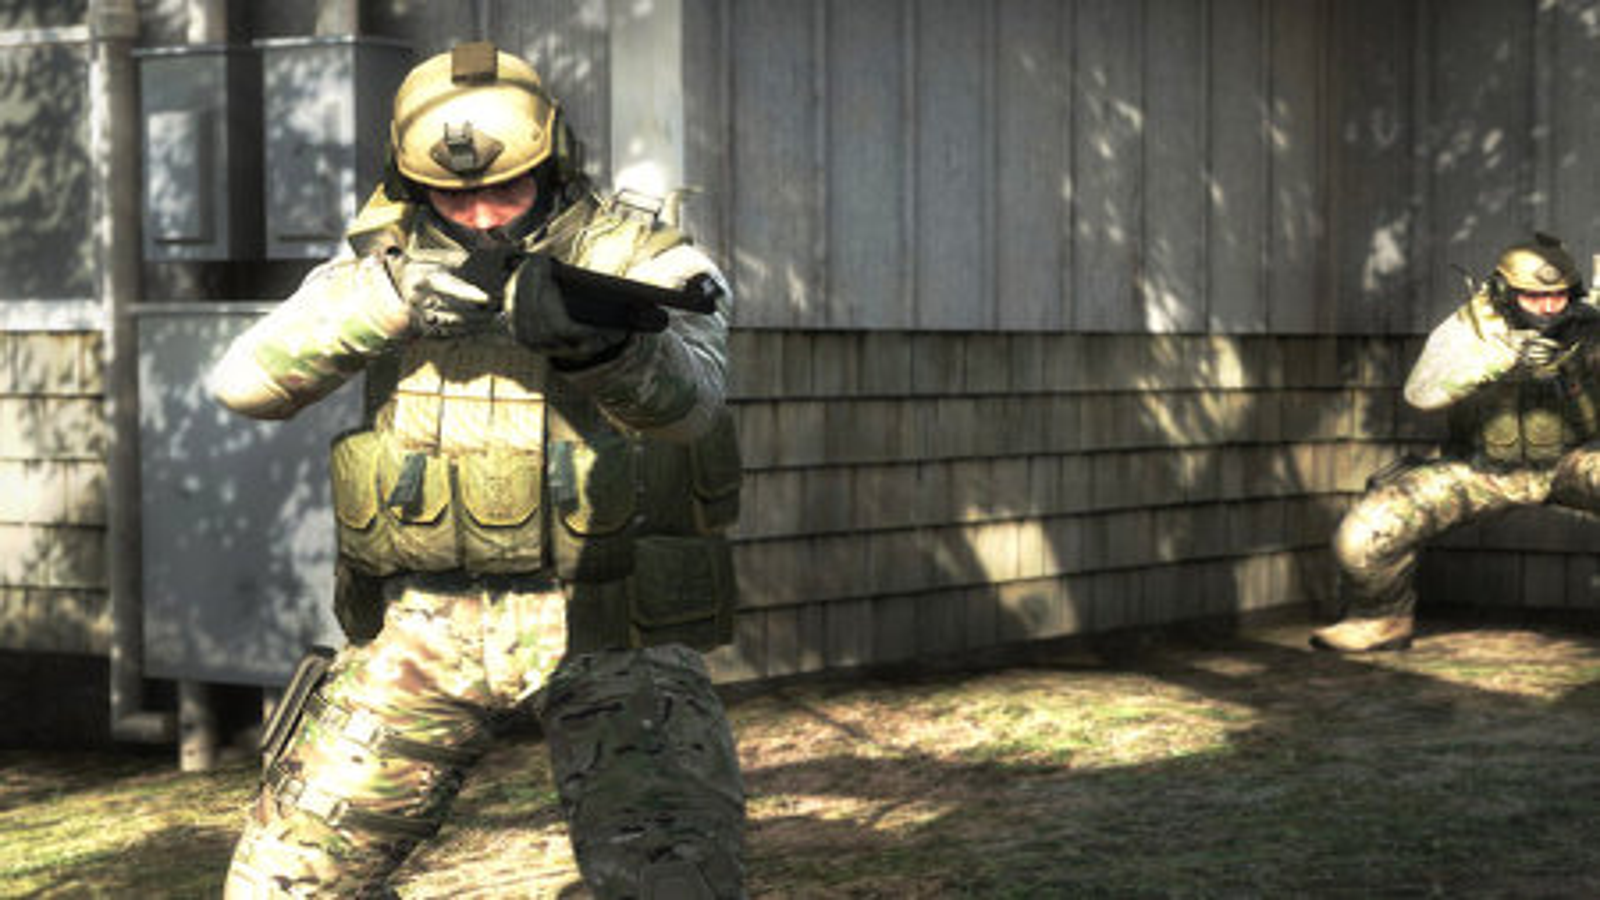 Counter-Strike: Global Offensive' pre-orders open on Steam, grants access  to beta - Polygon